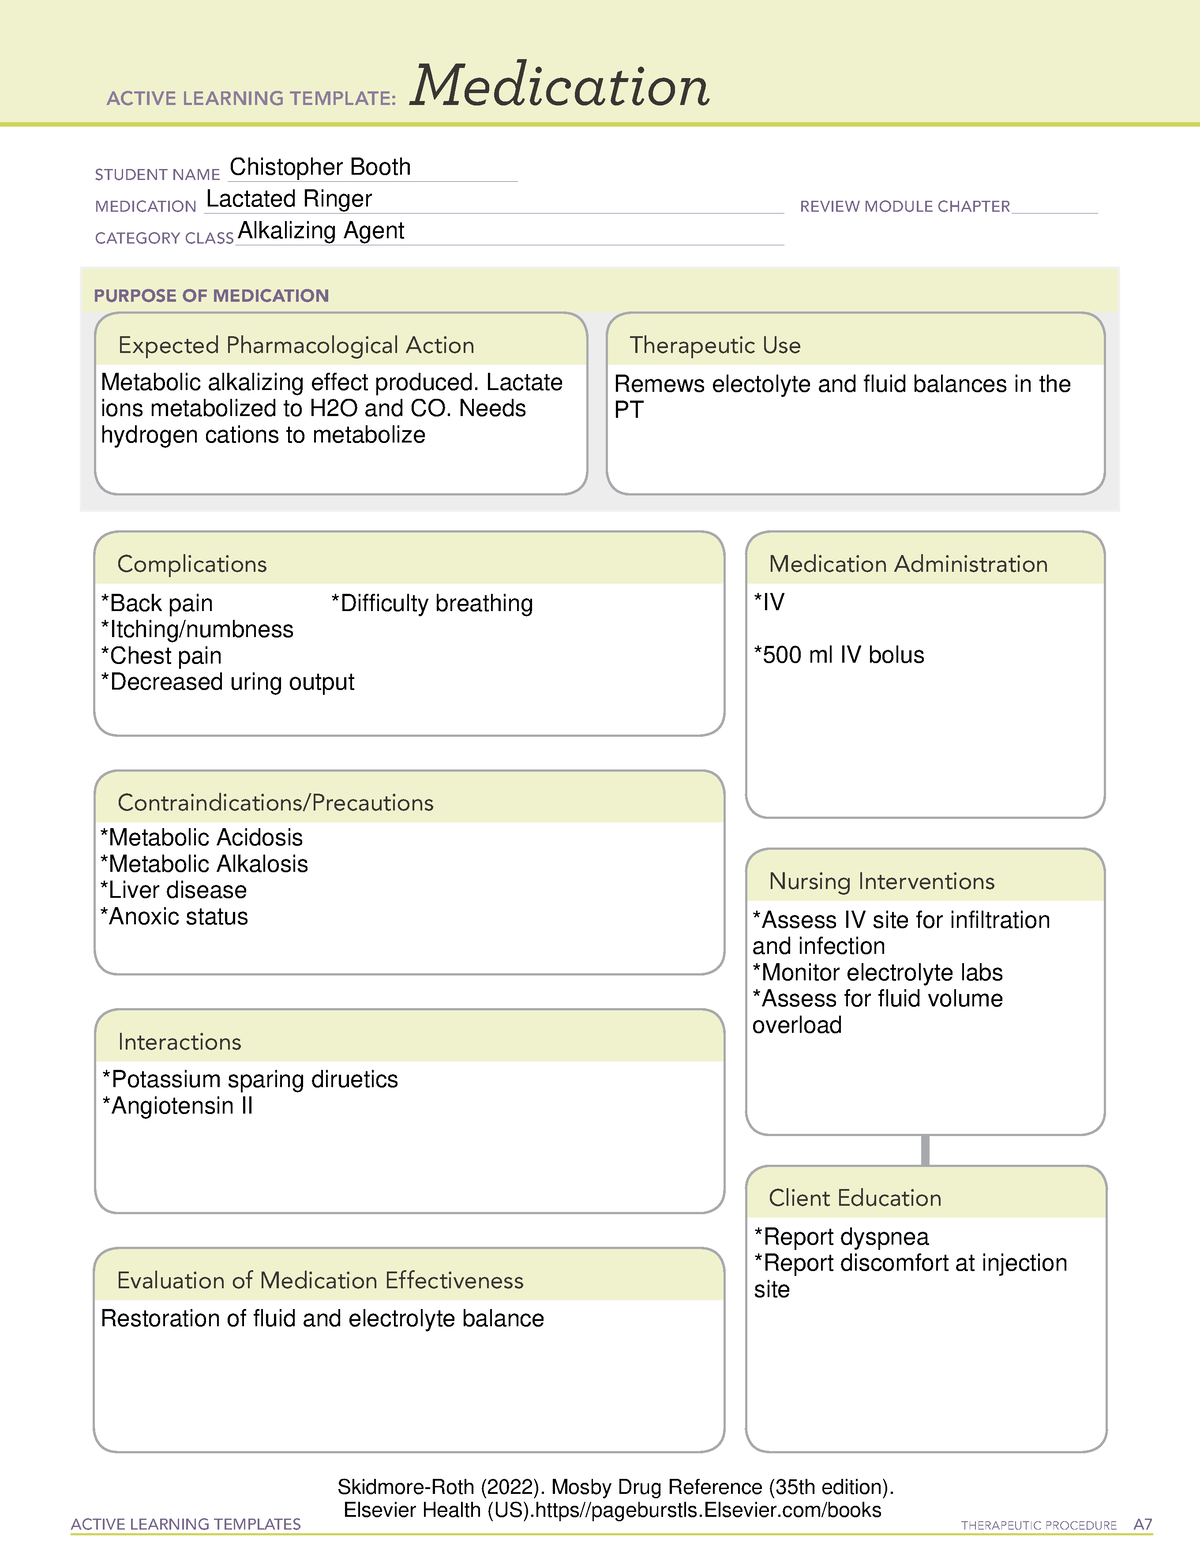 med-card-lactated-ringers-active-learning-templates-therapeutic